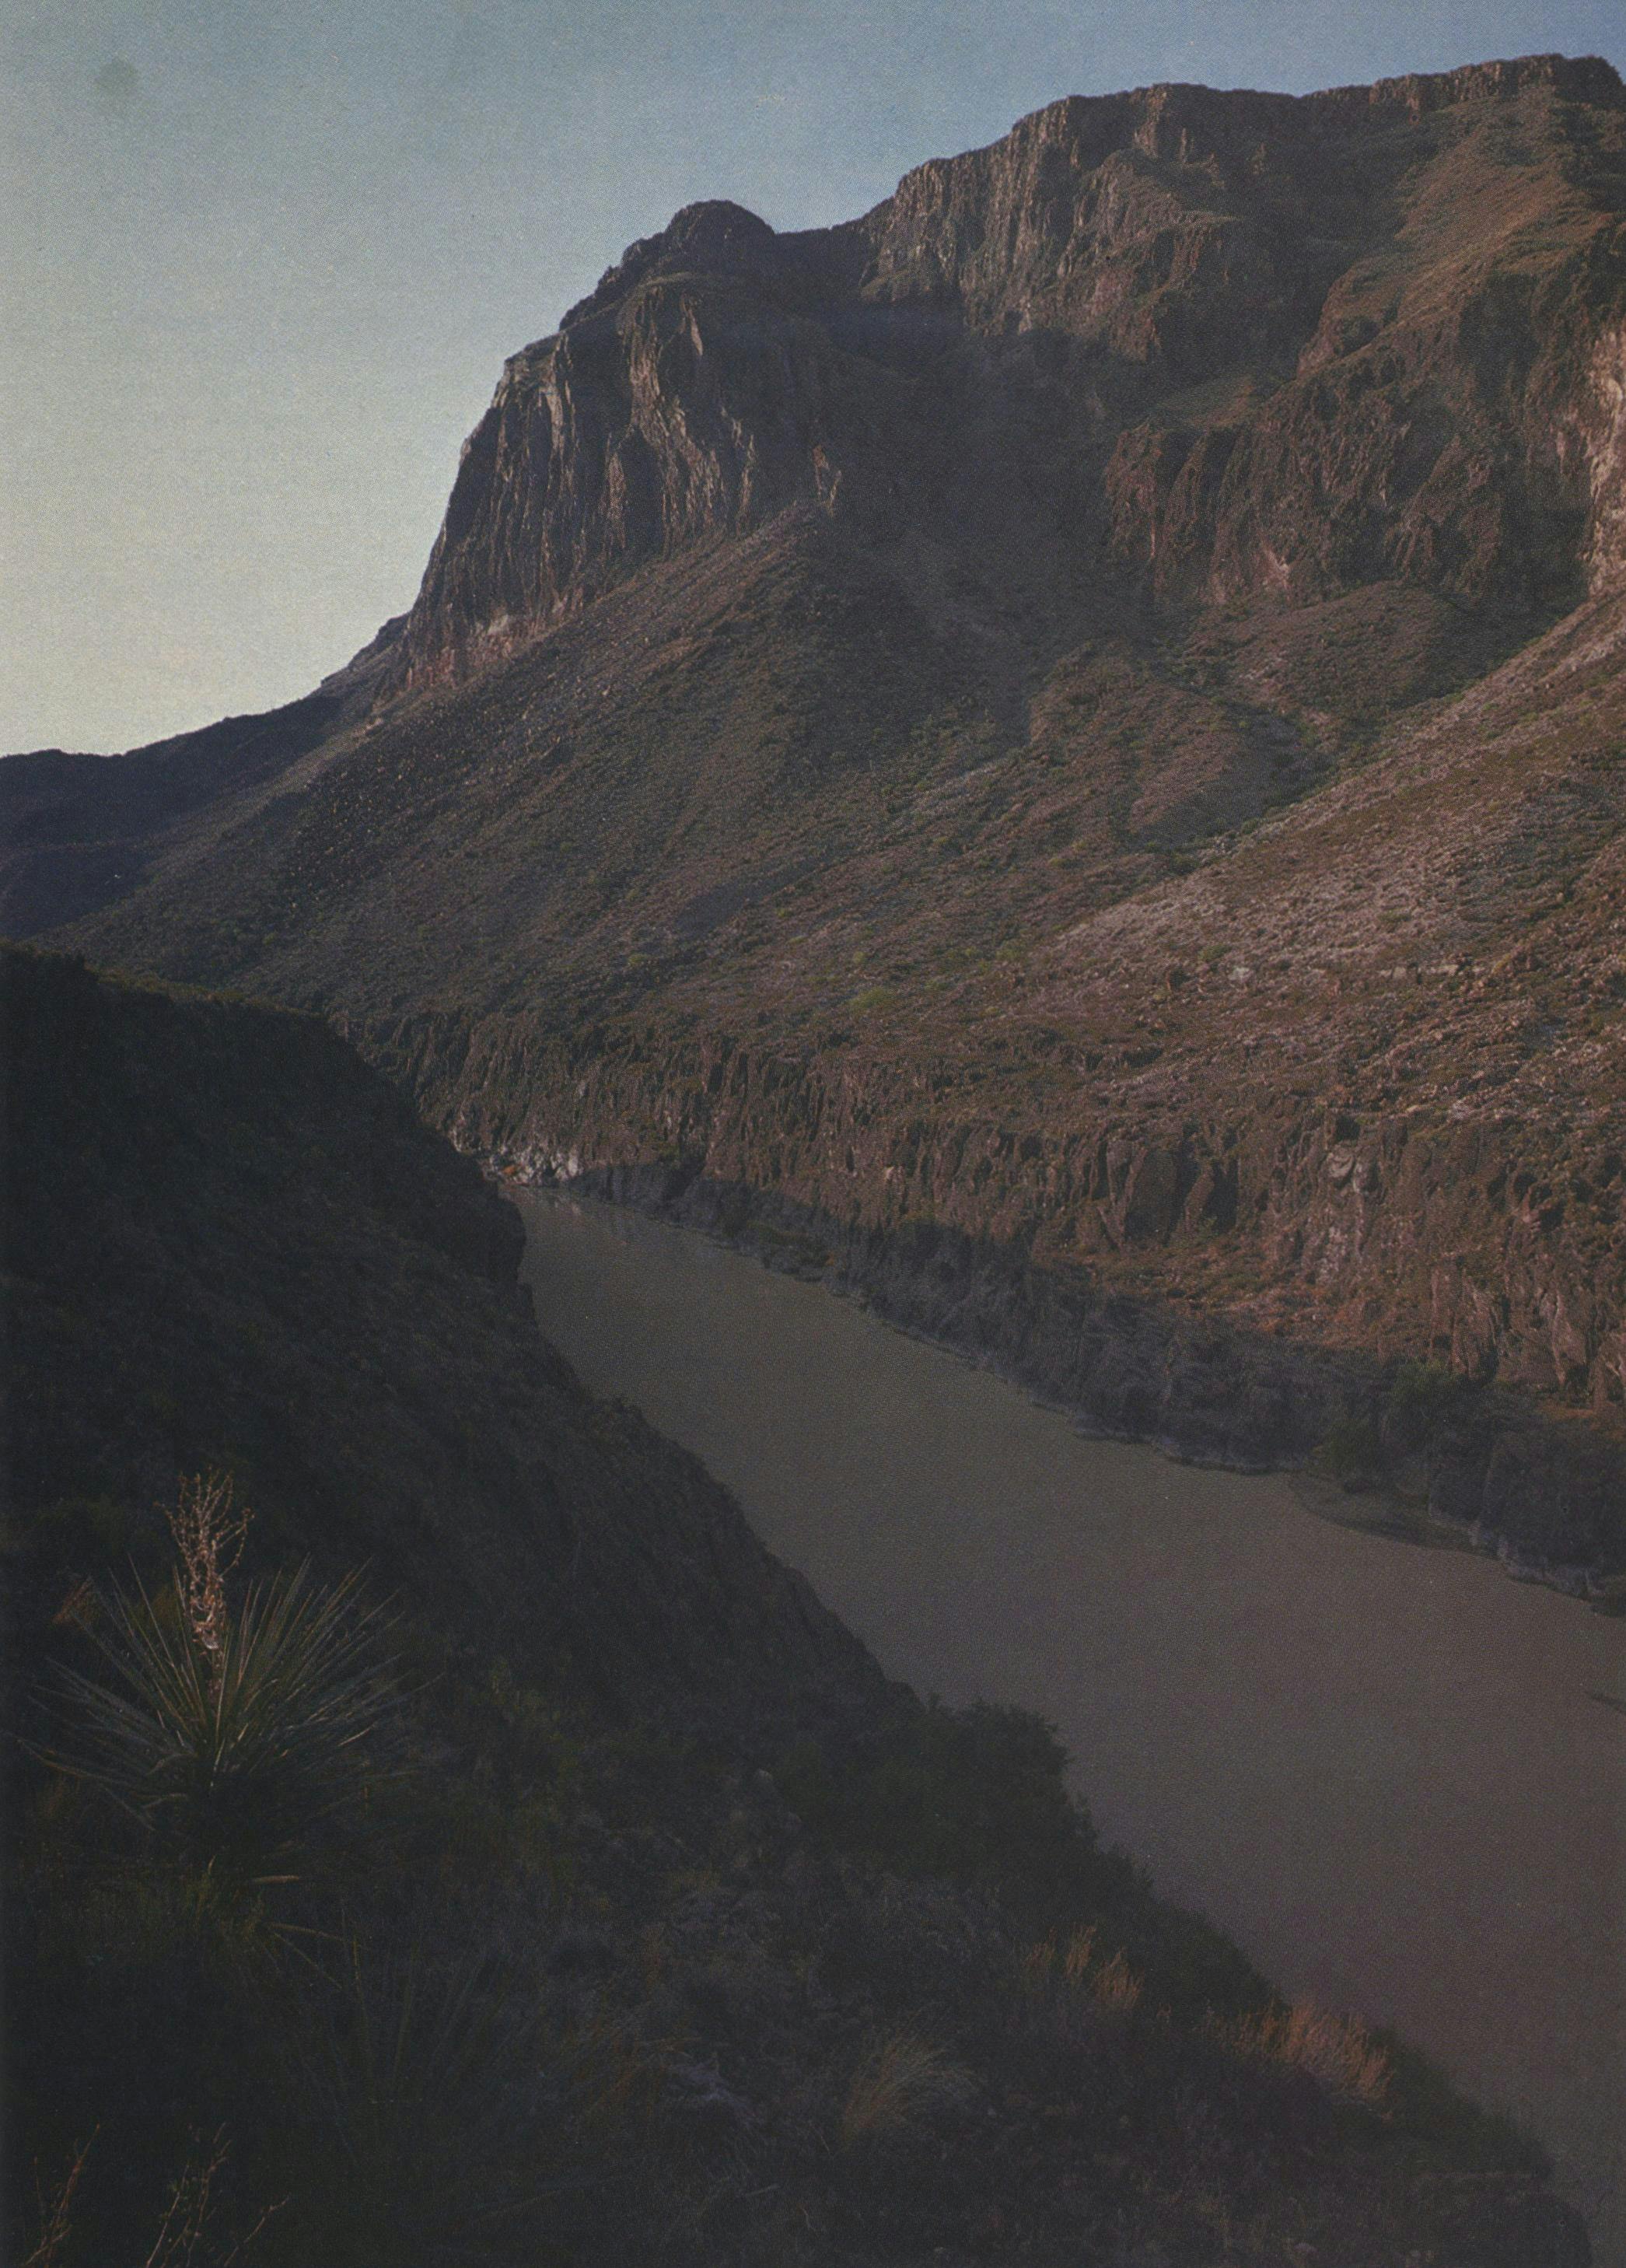 For centuries the Colorado Canyon remained uncharted by explorers. Here the Rio Grande has to carve a course to the sea.